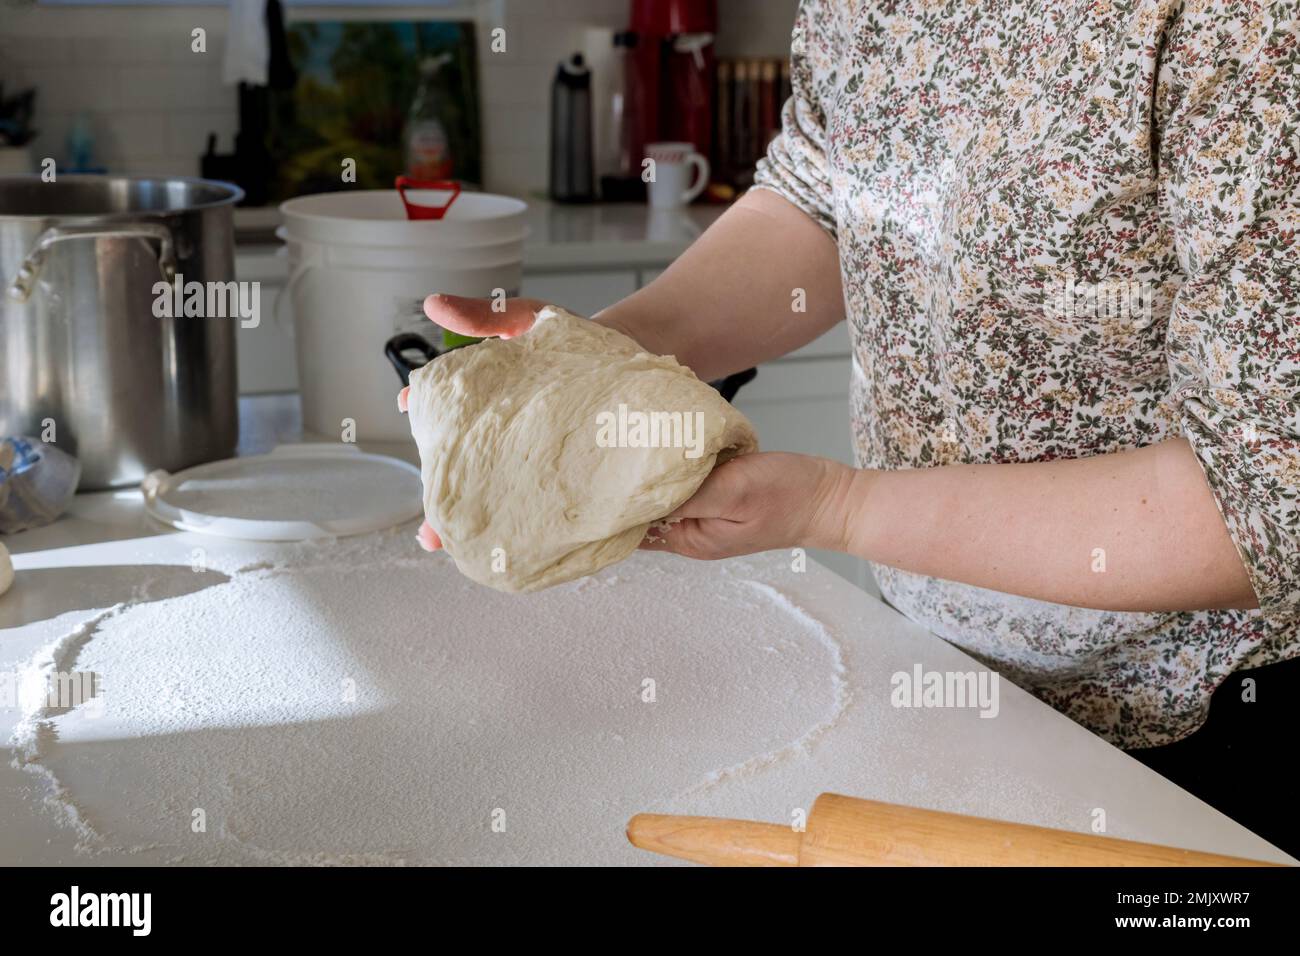 Woman mixing yeast dough for making homemade donuts on white countertop Stock Photo